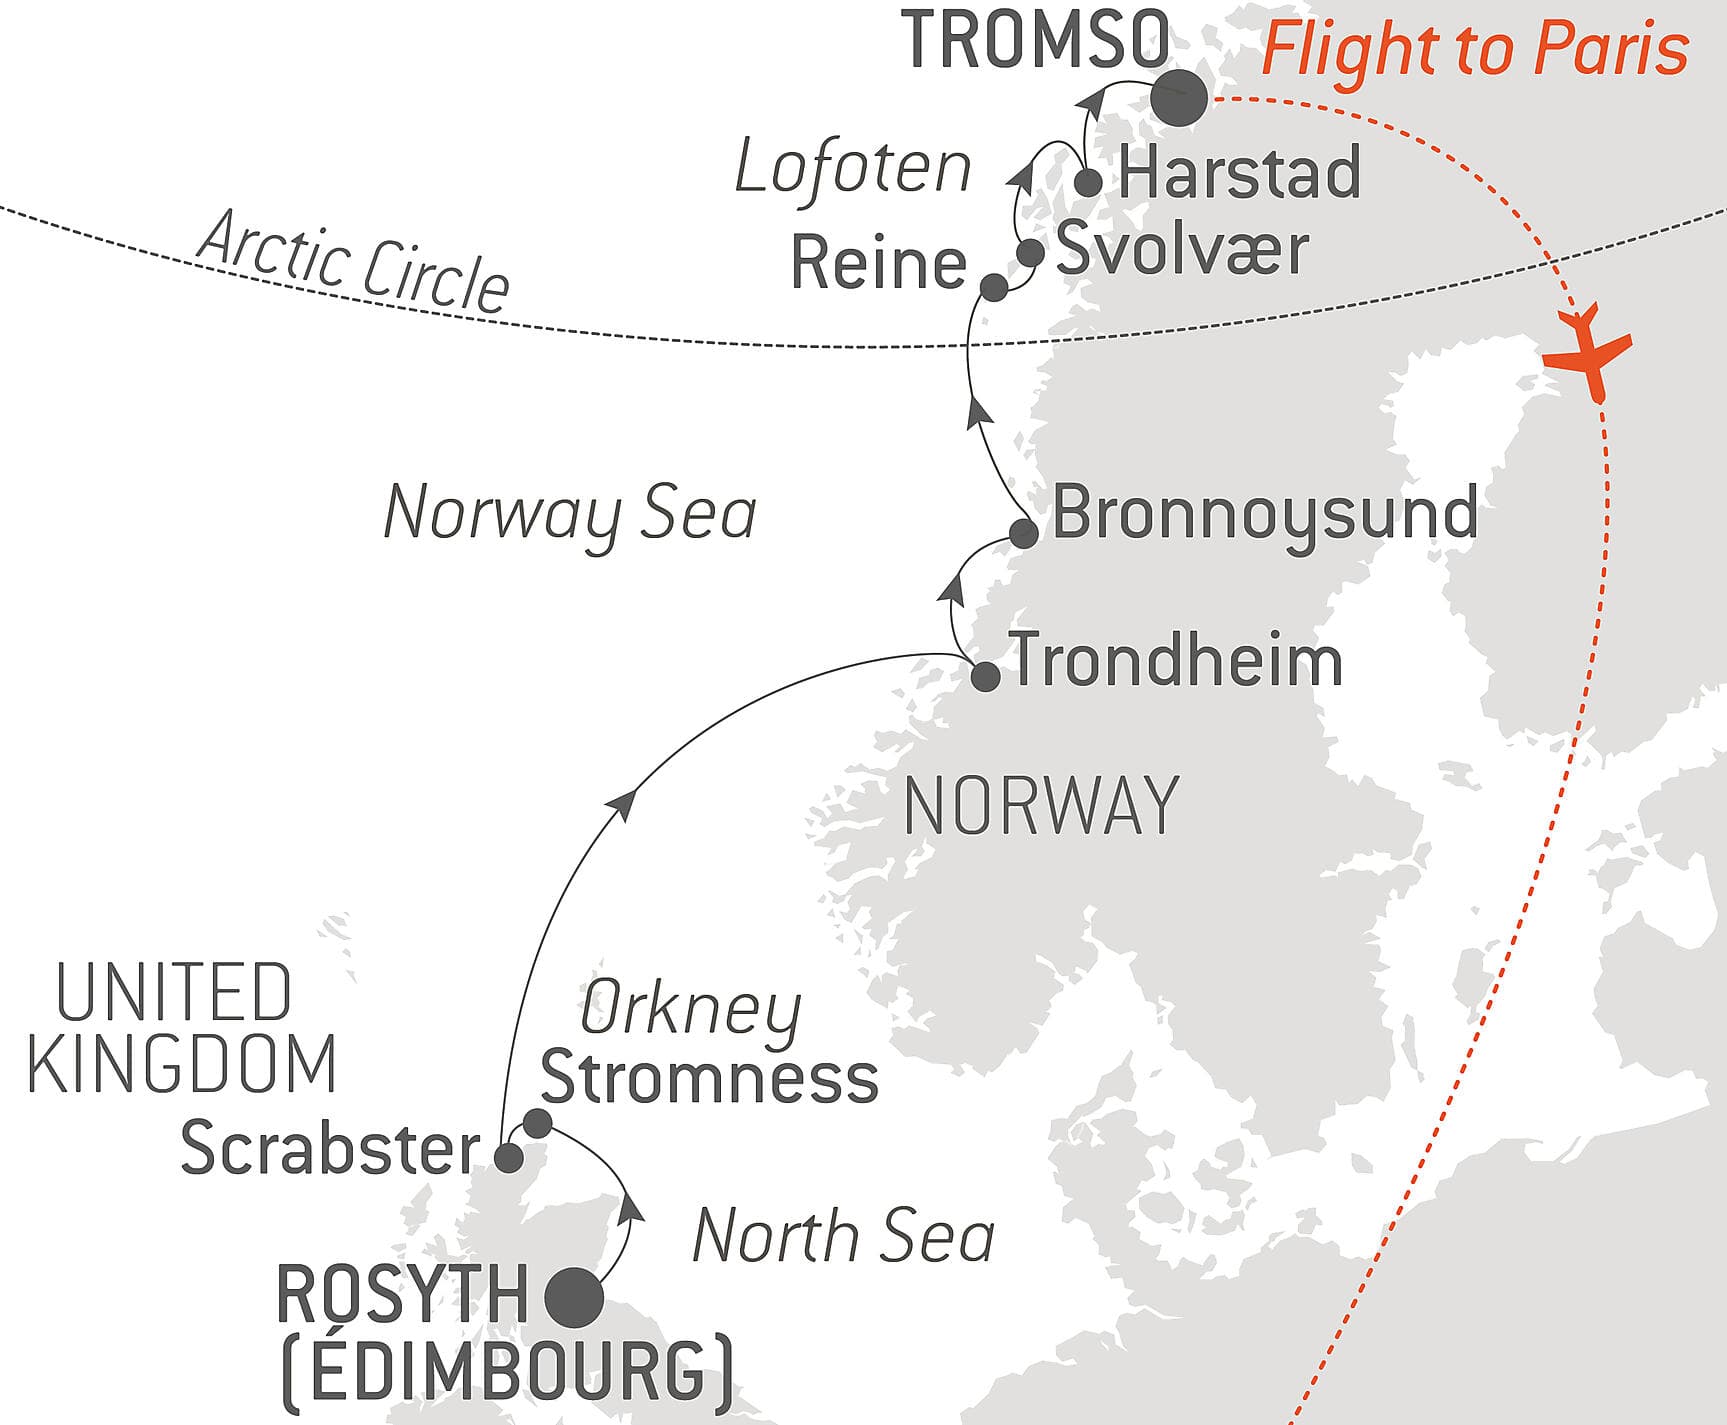 From the Scottish archipelago to the Arctic Circle